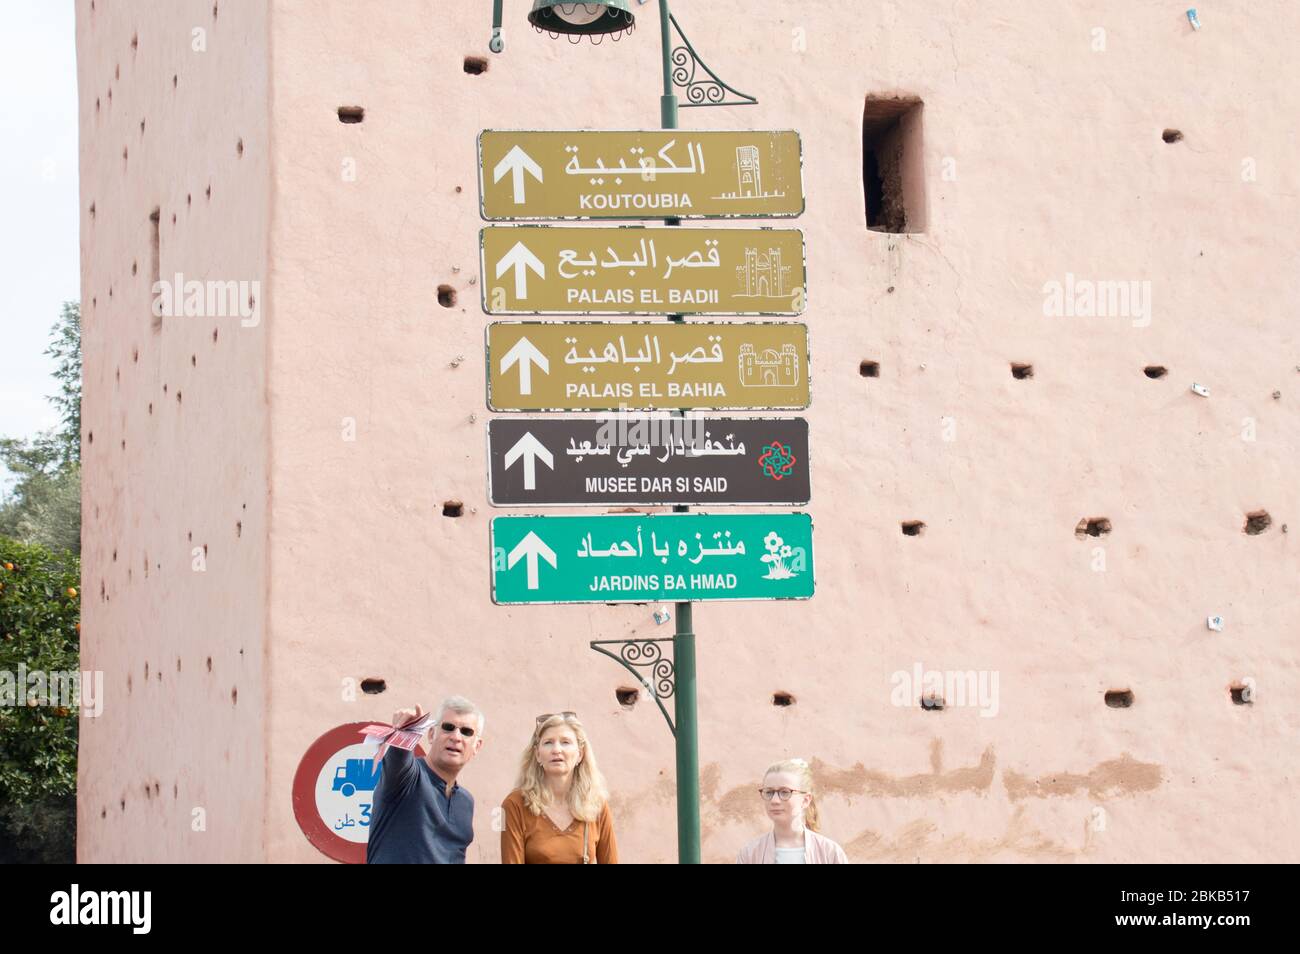 Direction sign boards in the city of Marrakech with Arabic and English letters (Marrakesh) giving directions to famous landmark, Morocco, North Africa Stock Photo